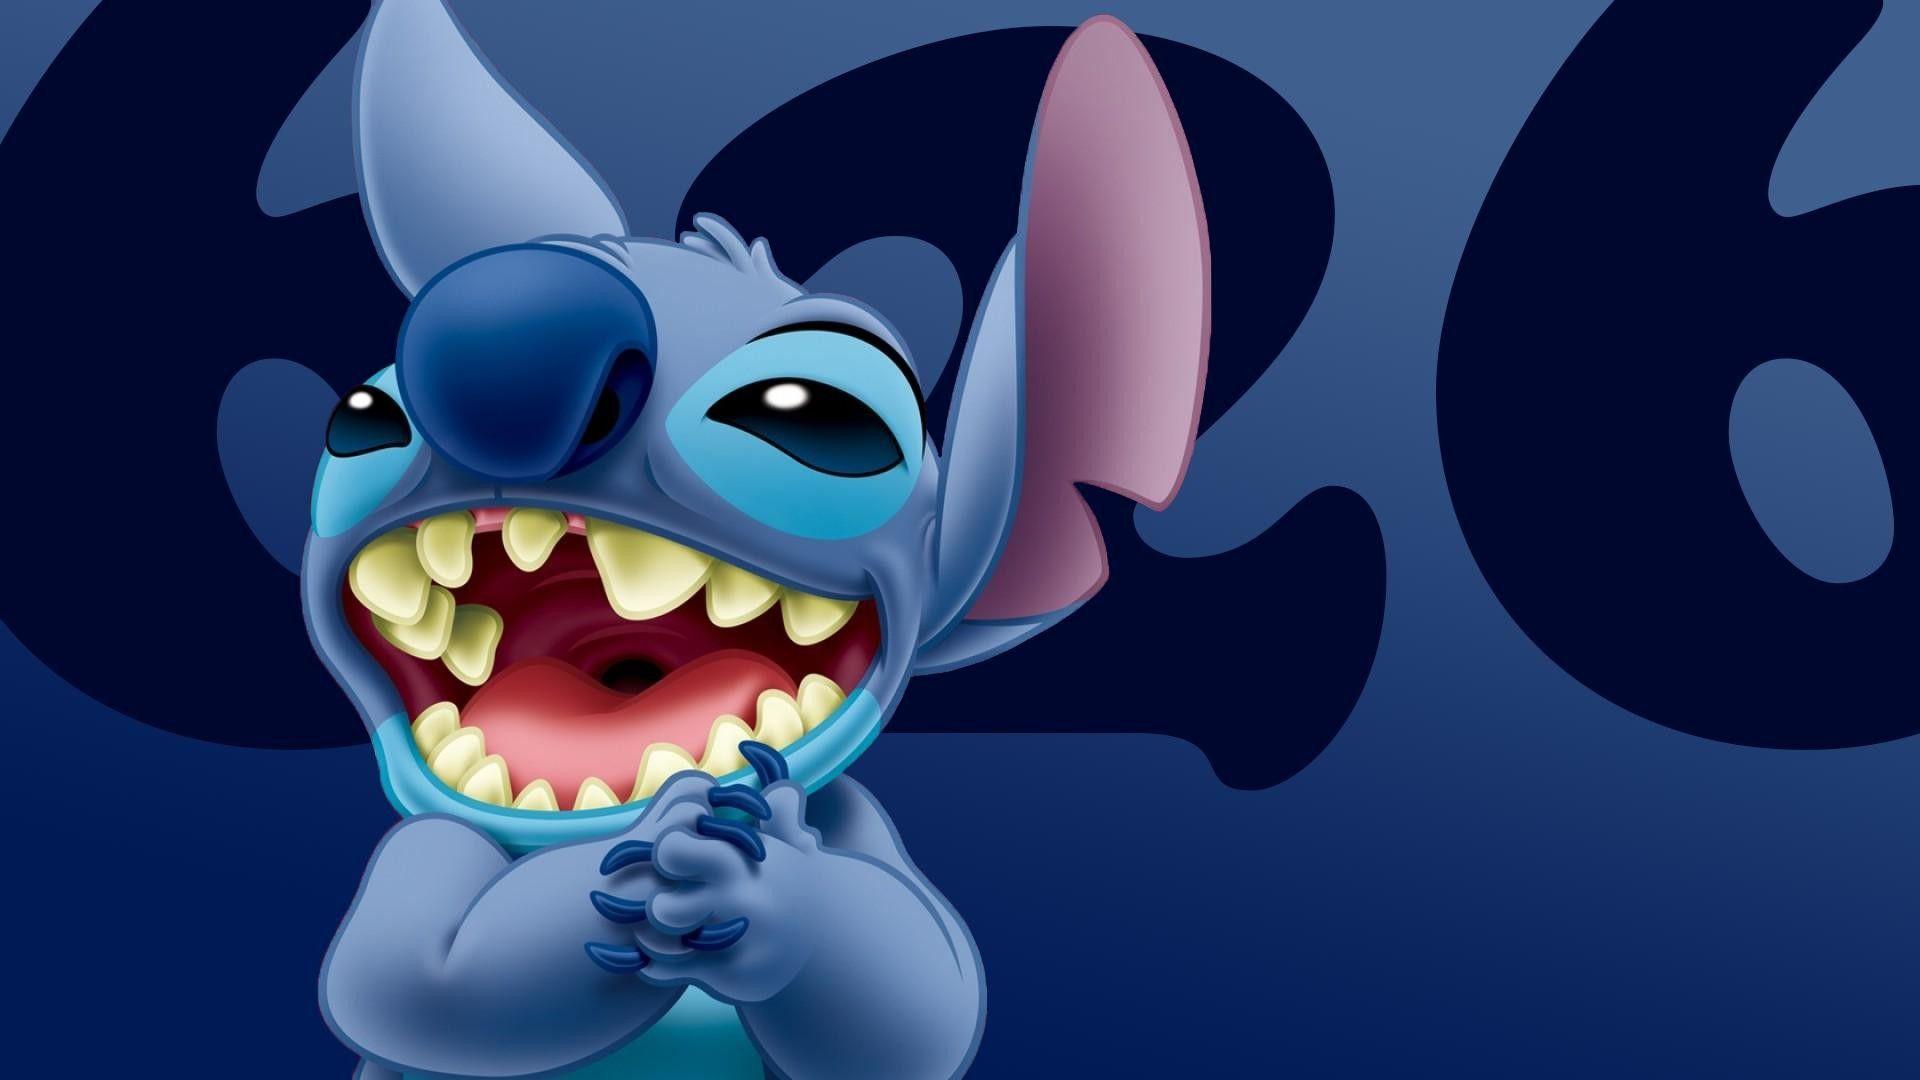 1920 x 1080 · jpeg - Cute Baby Stitch Wallpapers - Top Free Cute Baby Stitch Backgrounds ...